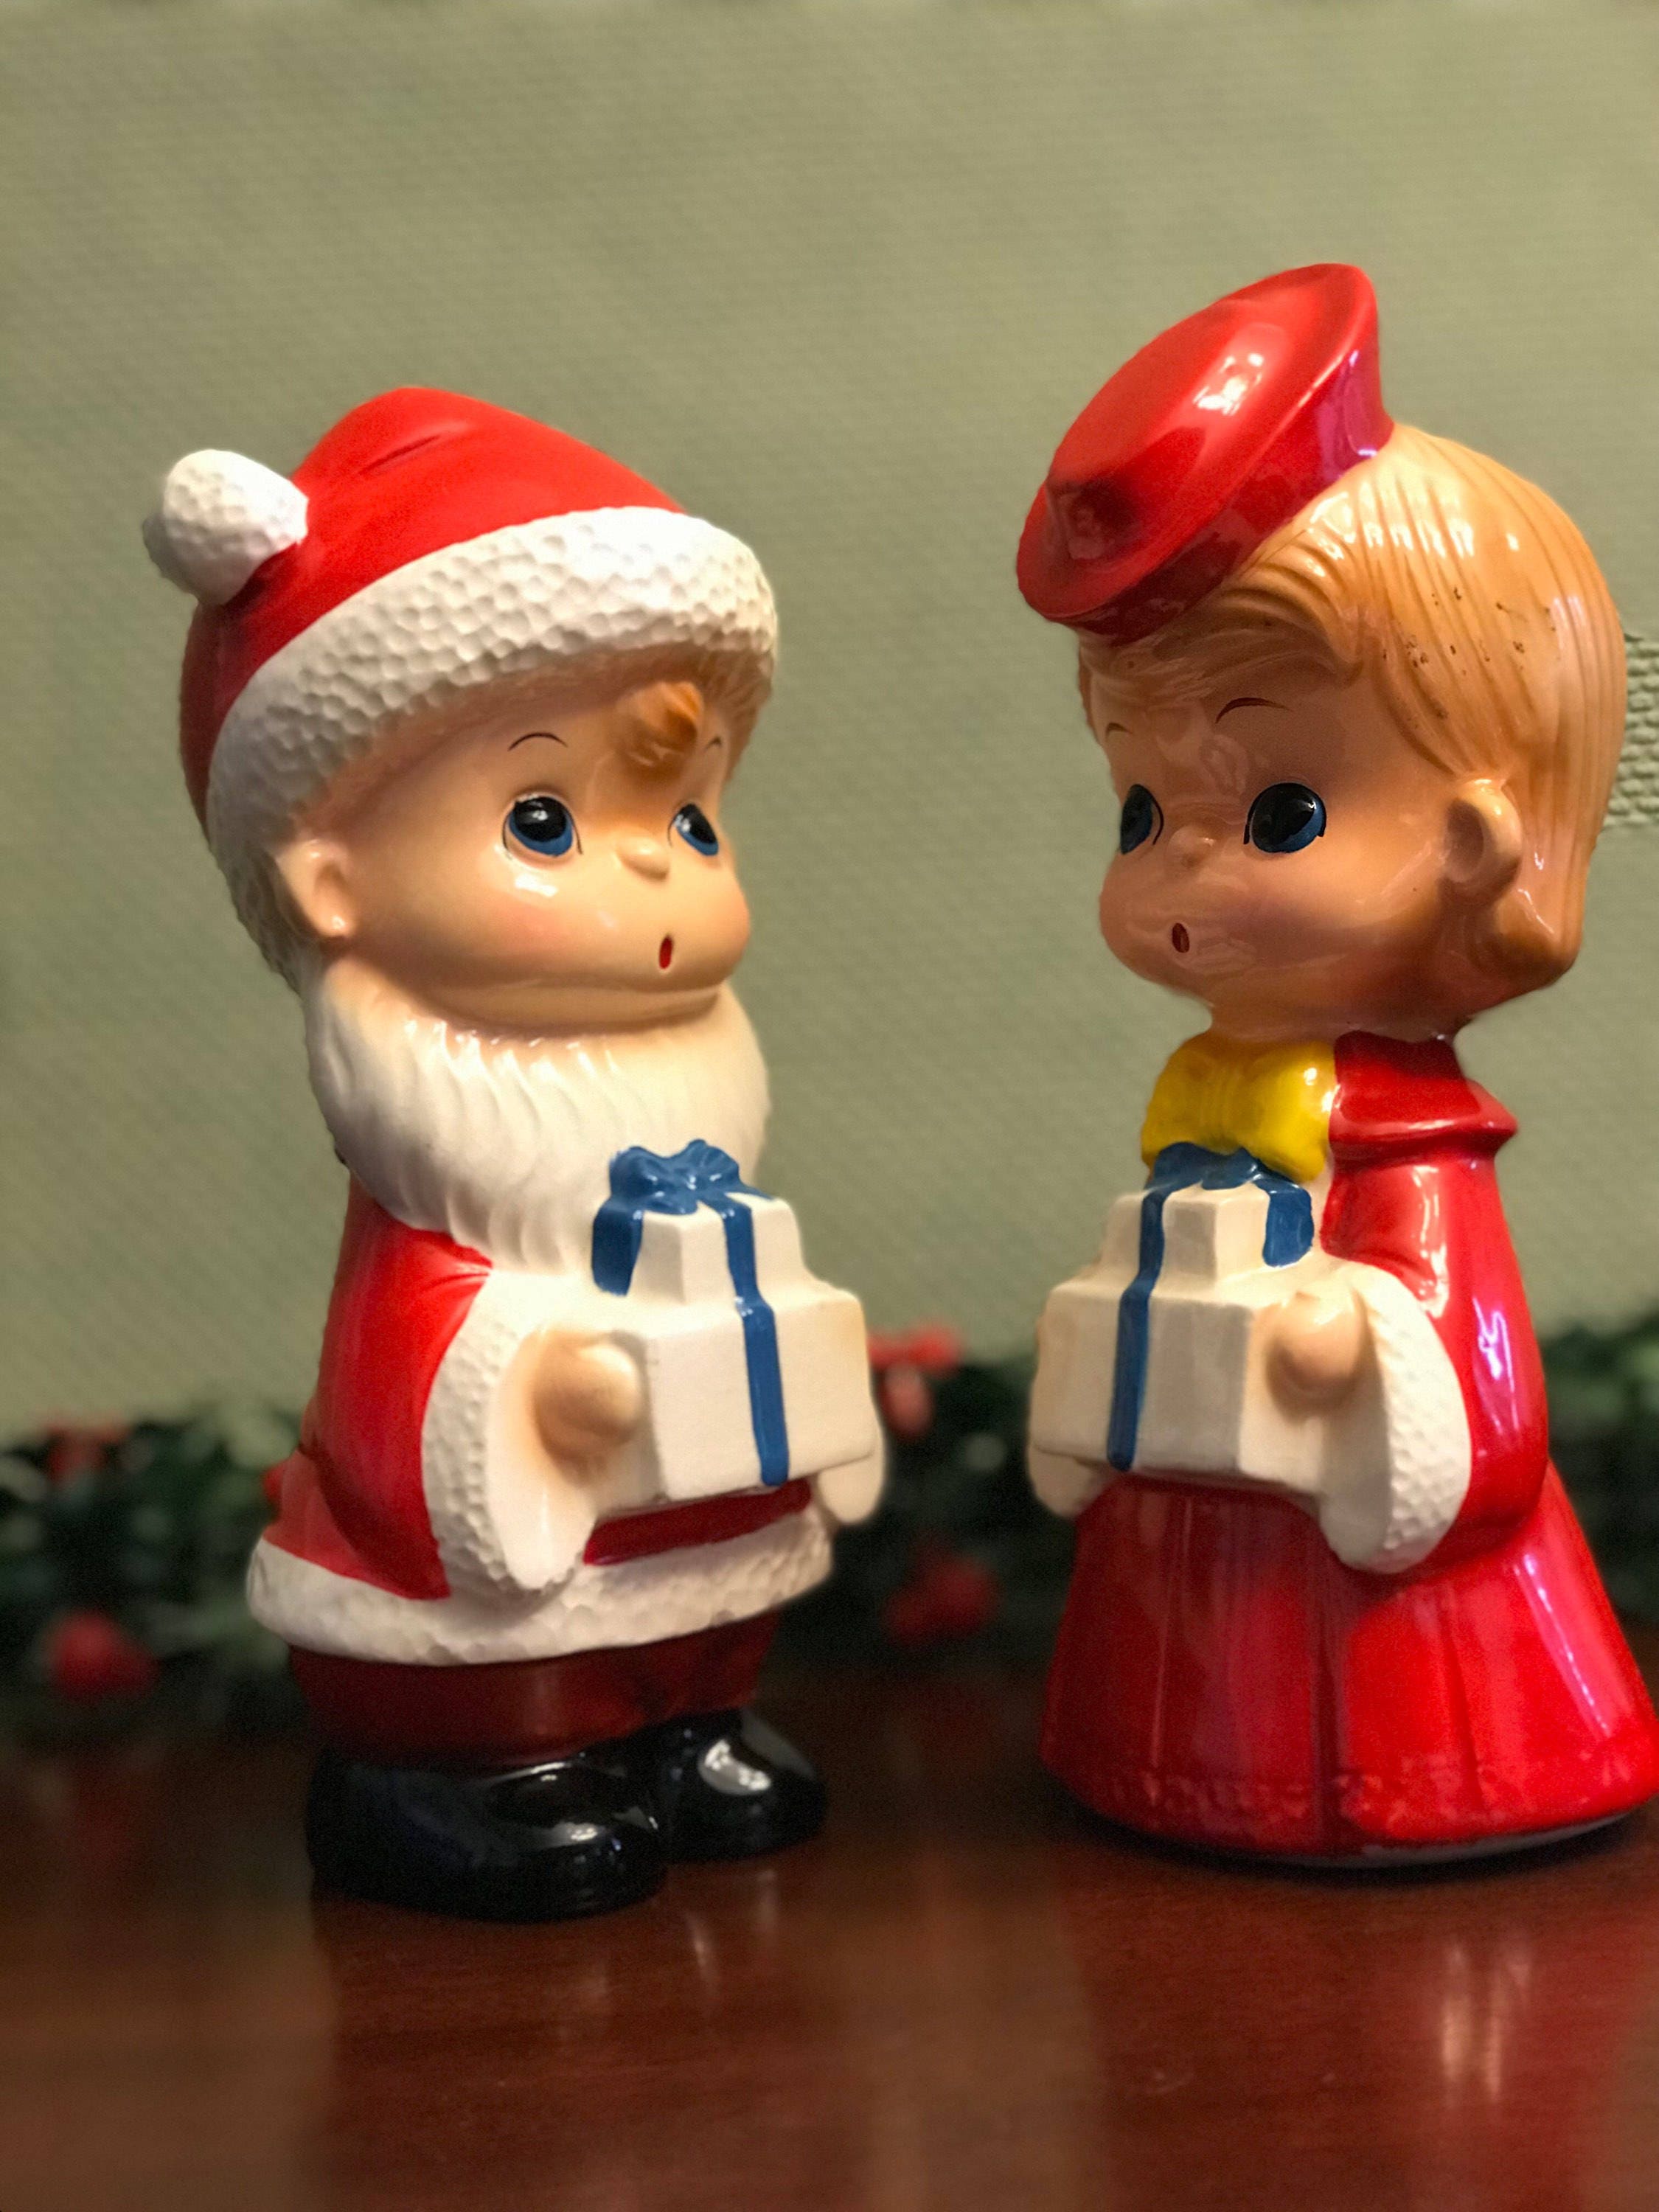 Vintage Christmas Figurines, Little Boy and Girl figurines with gifts ...